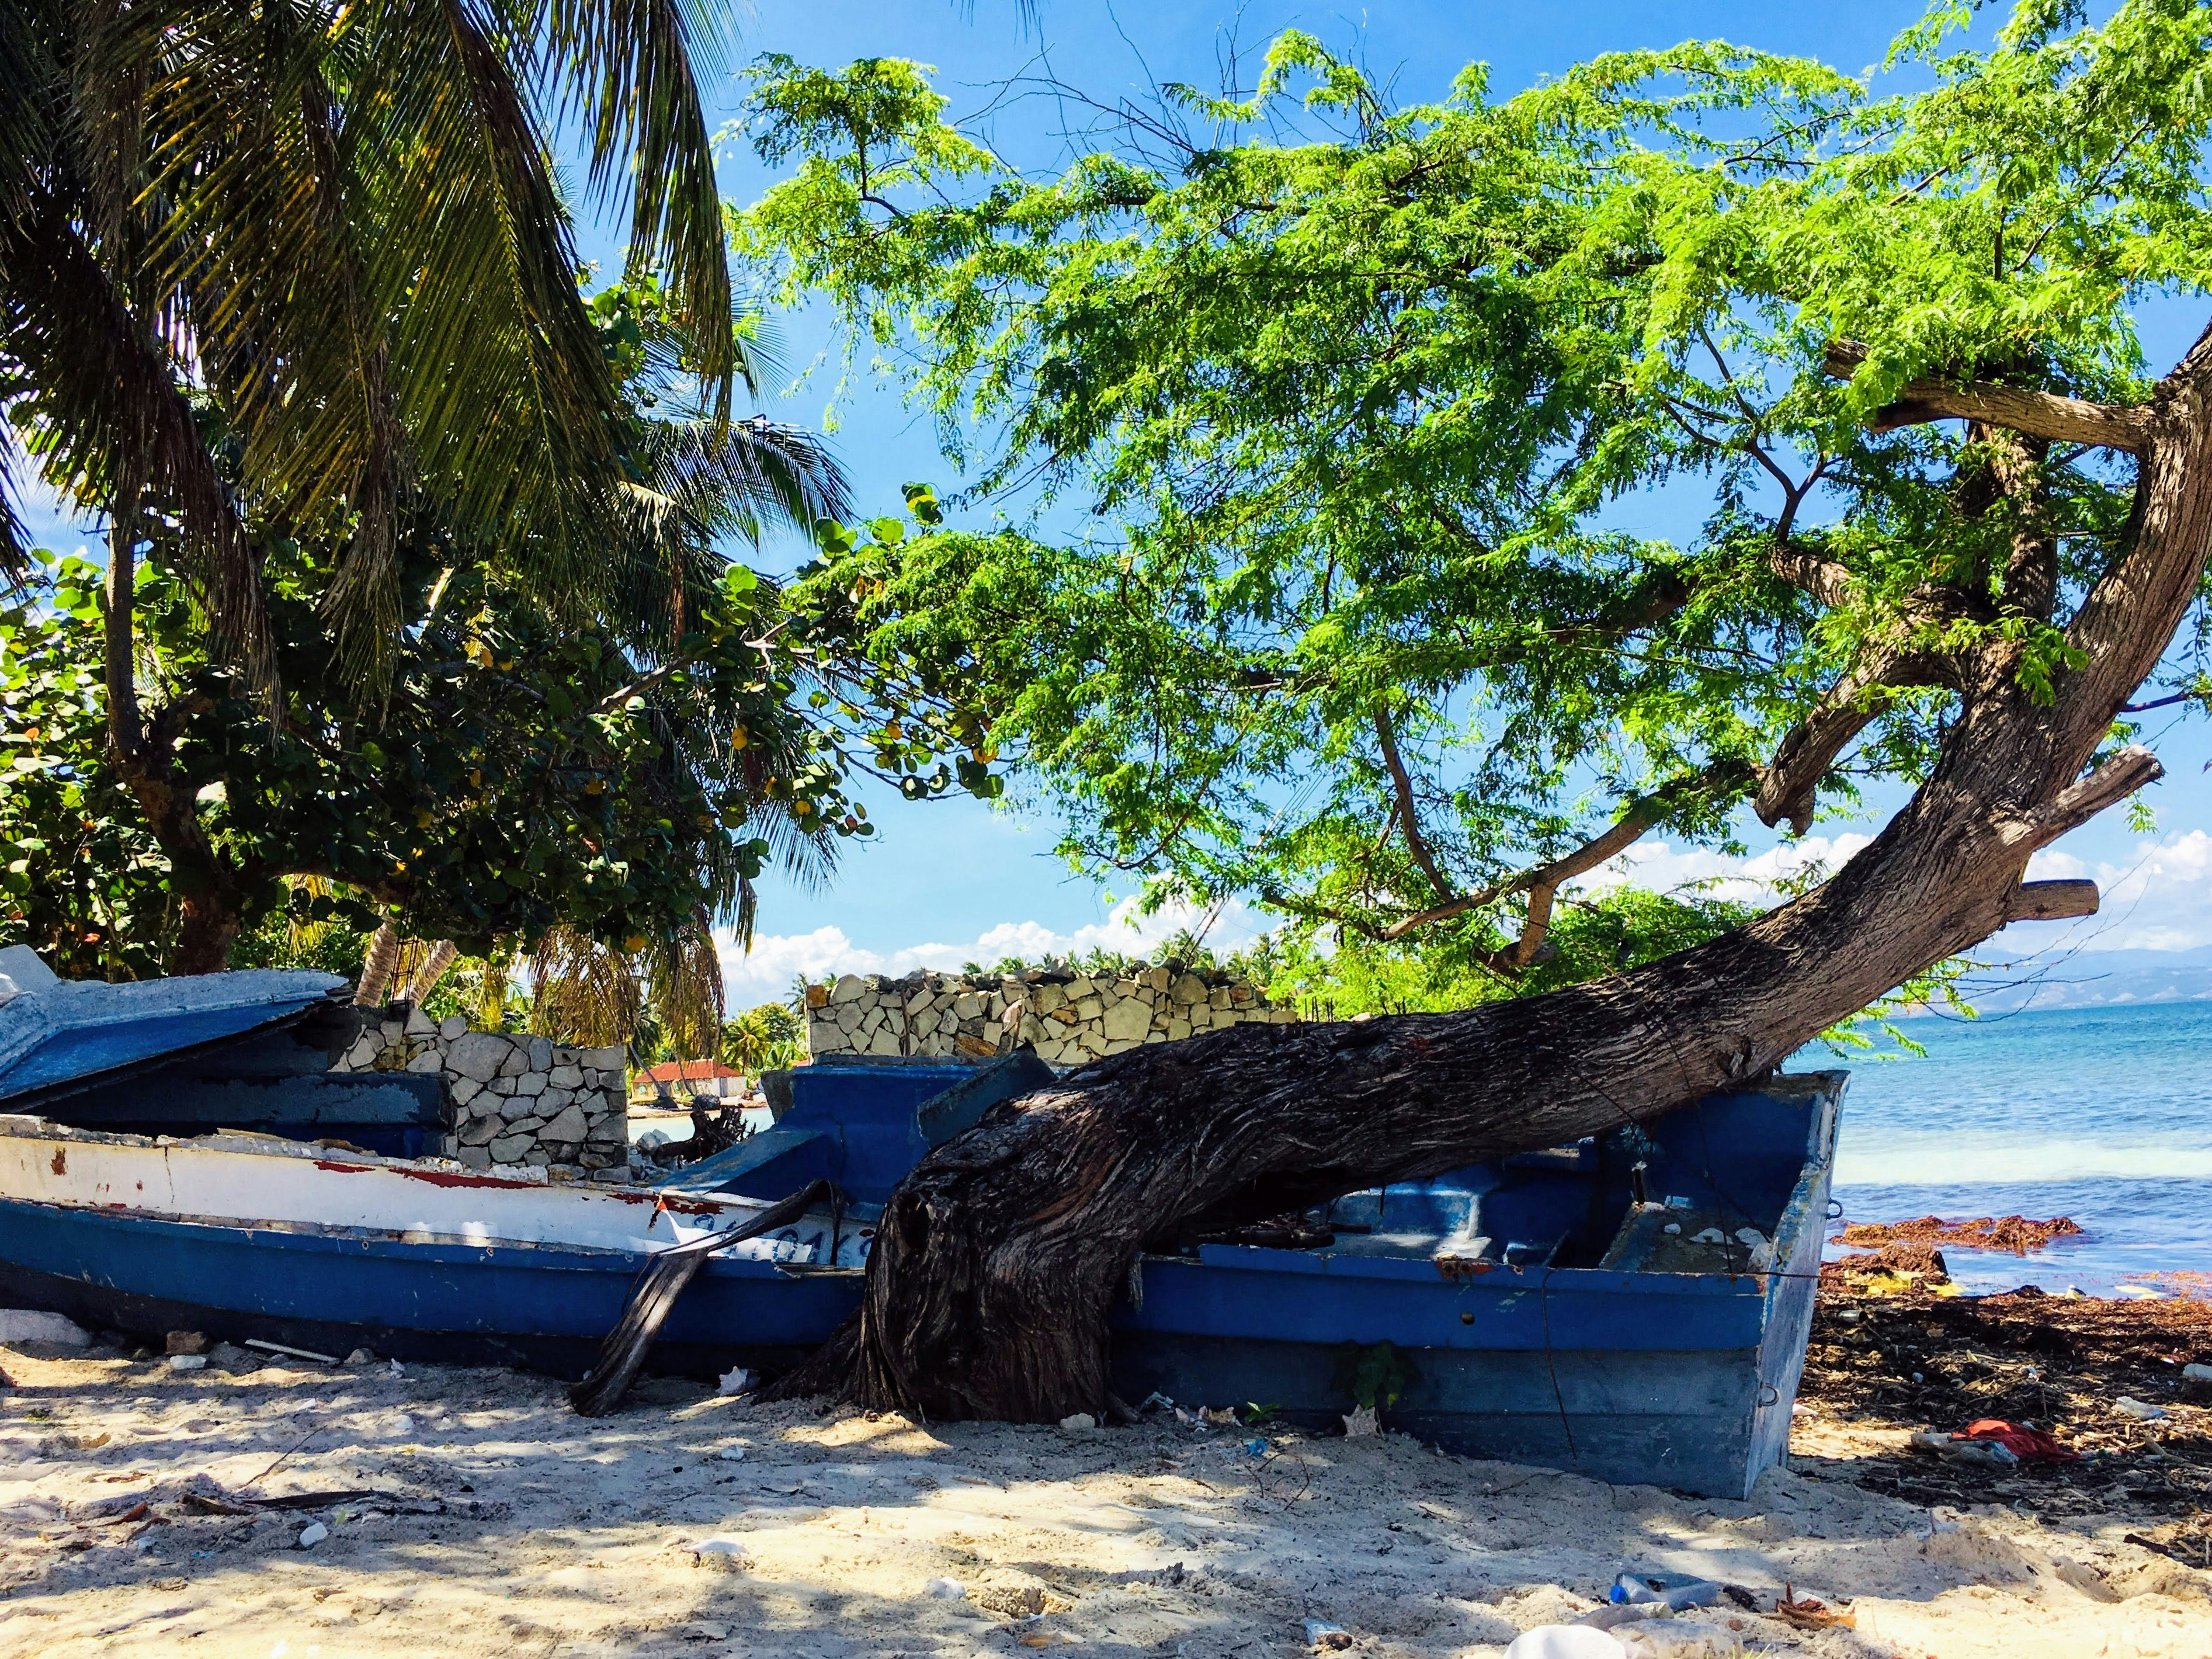 A tree grew around this shipwrecked rowboat on the island of Ile a Vache, Haiti.